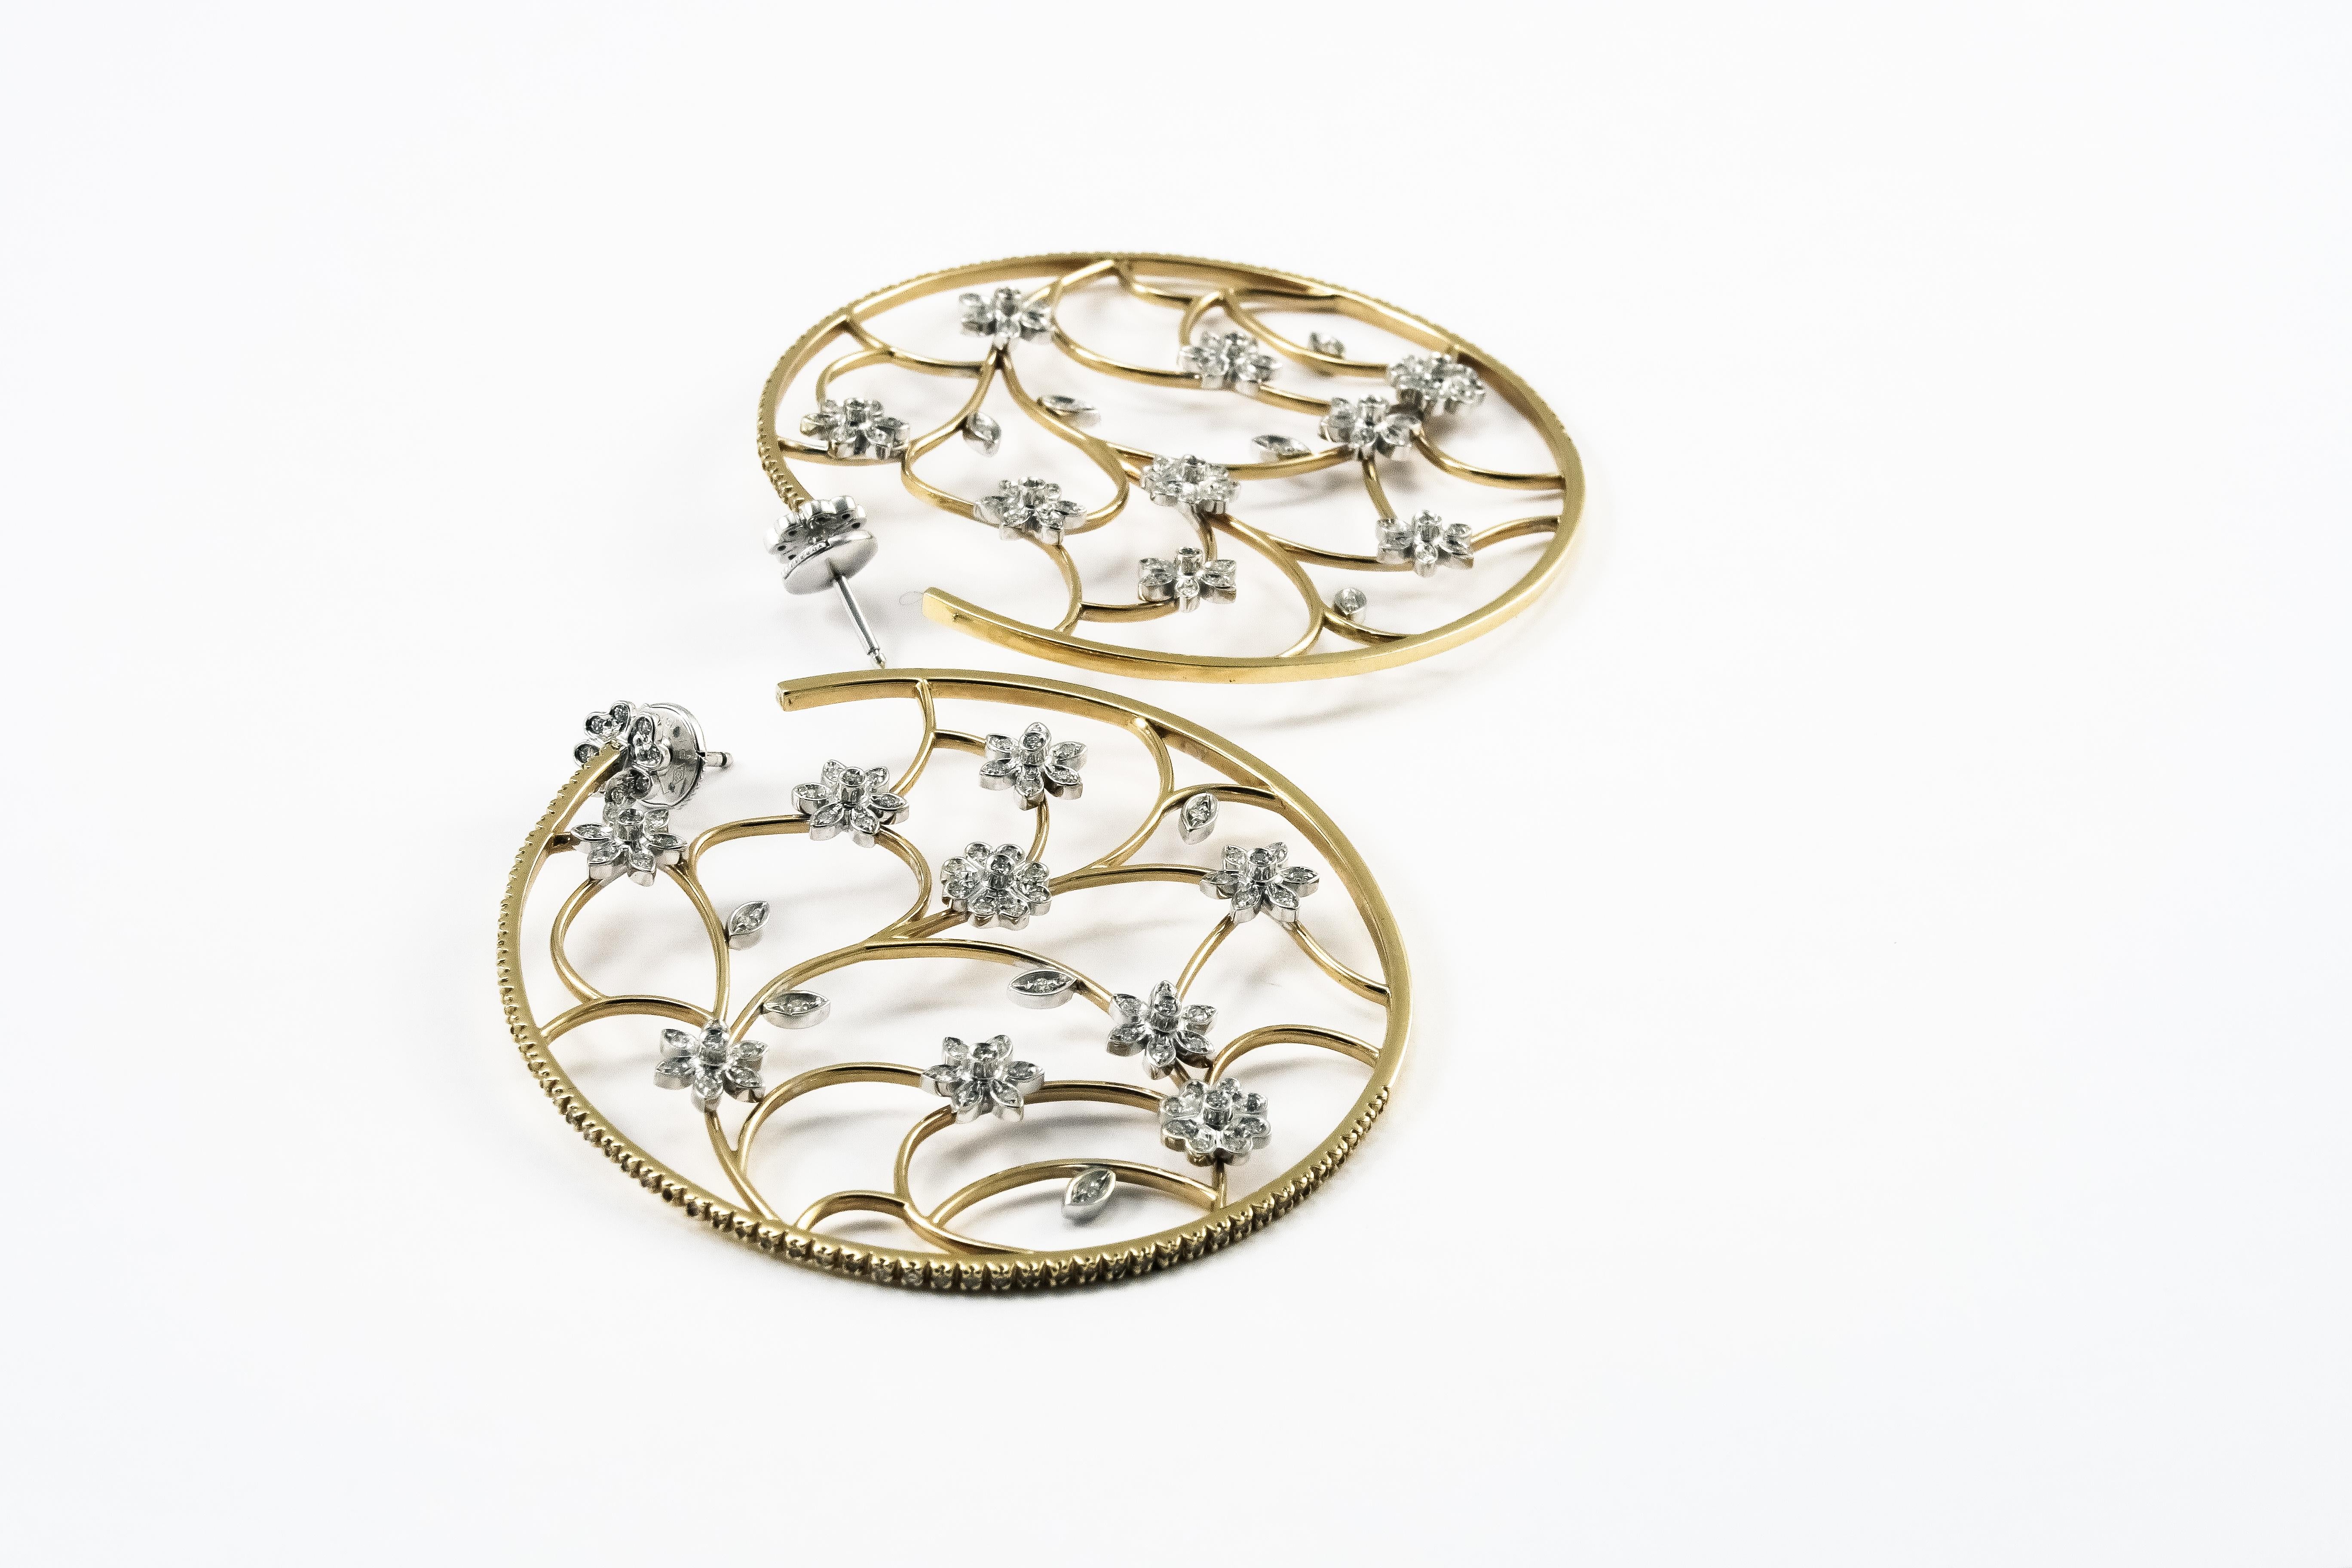 Hoop earrings in 18K yellow gold set with diamonds, flower-modeled openwork disk, and diamonds along the border.  A touch of fascination for the everyday posh style. 
Total ct diamonds weight 2,12
Gold weight 31,70

